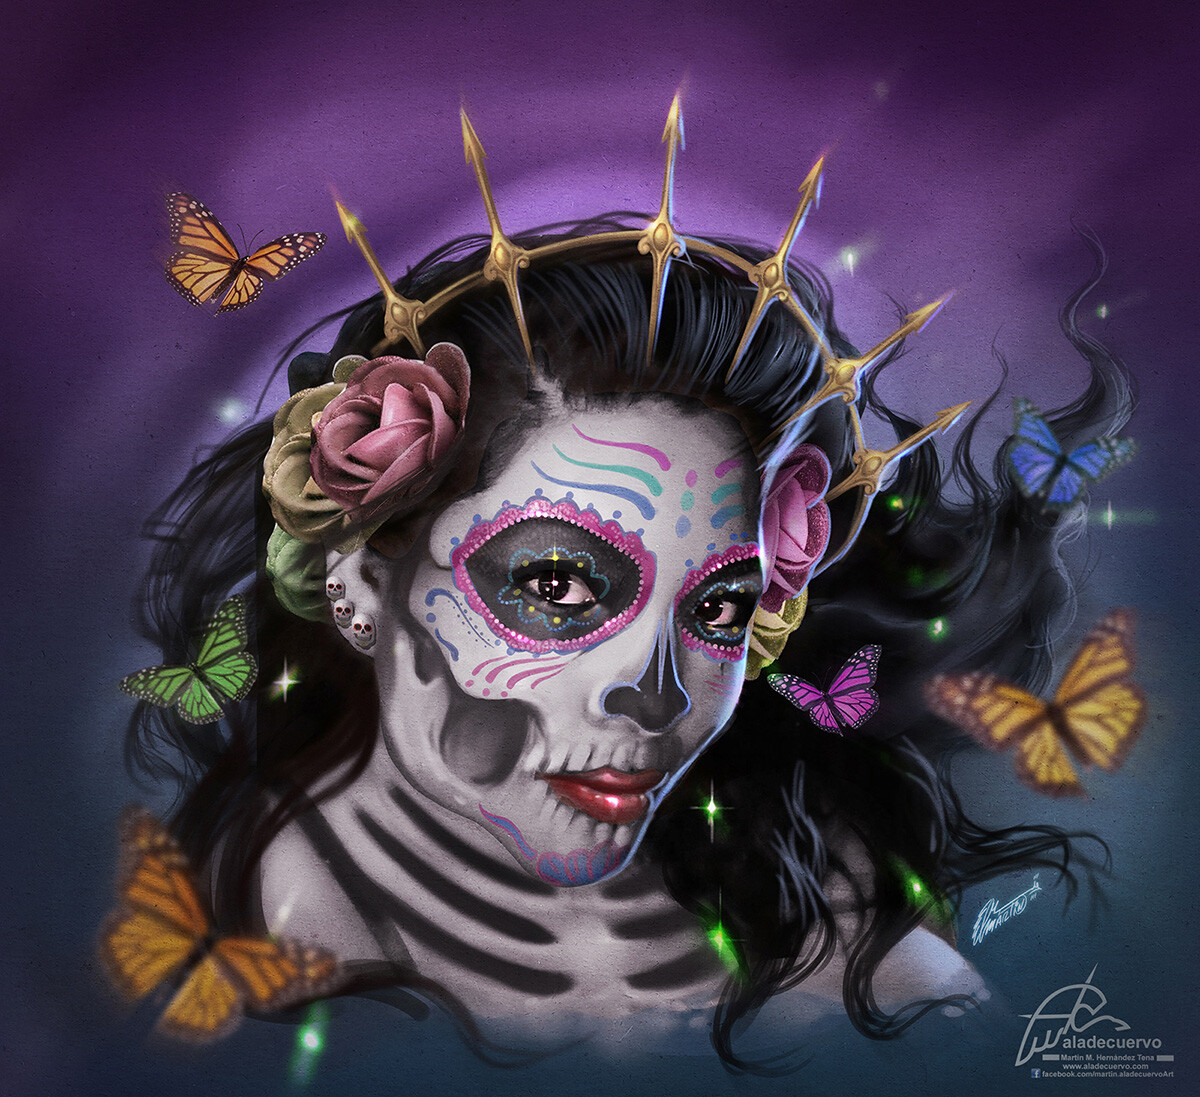 to be painted like "La Catrina", character of the mexican culture...